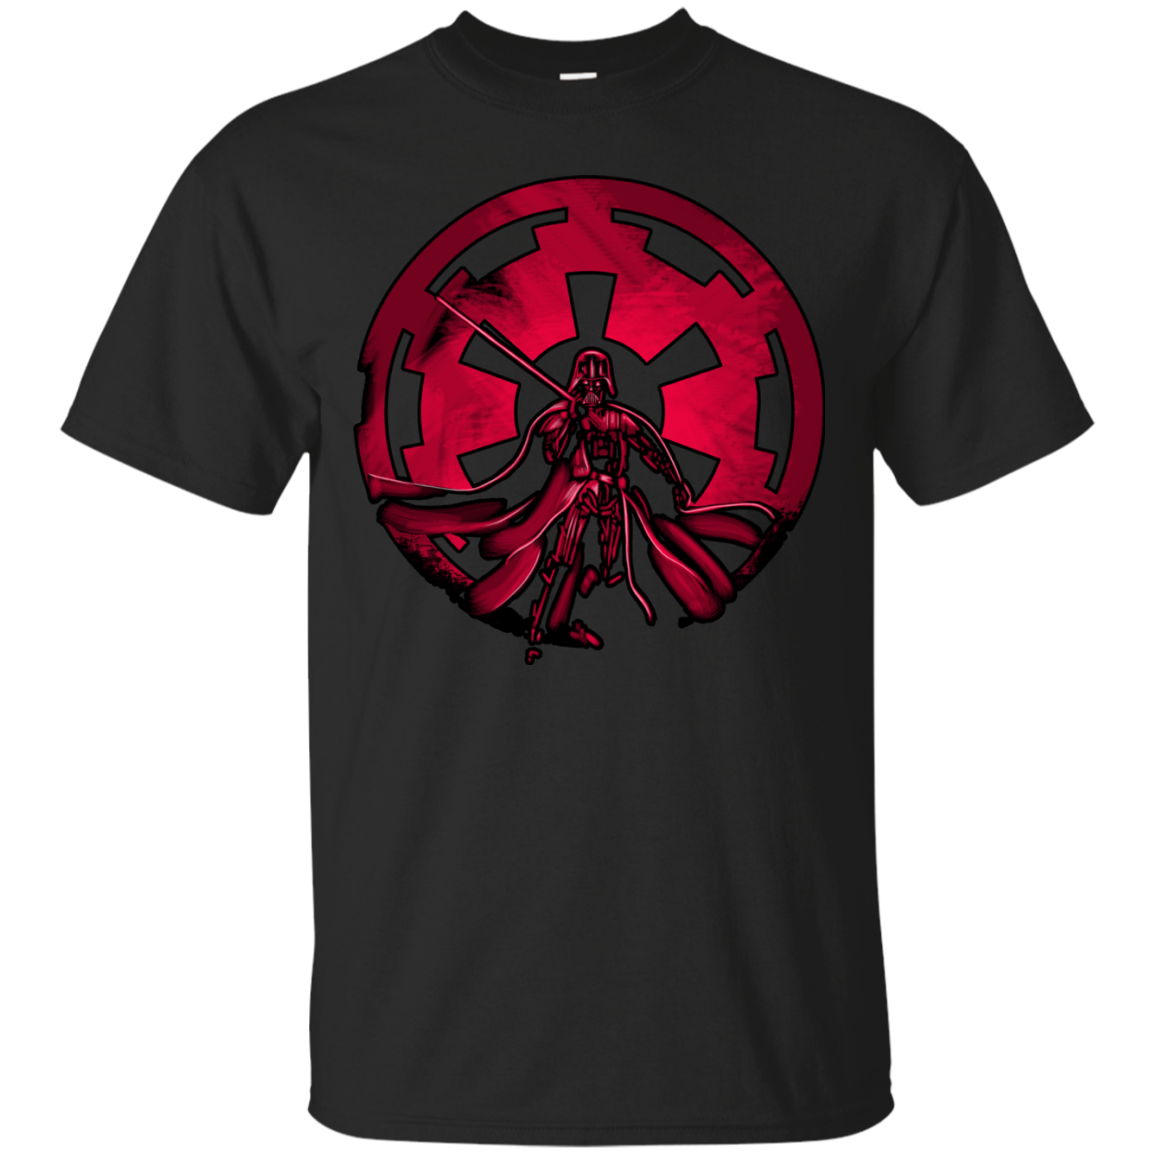 The Imperial T-Shirt